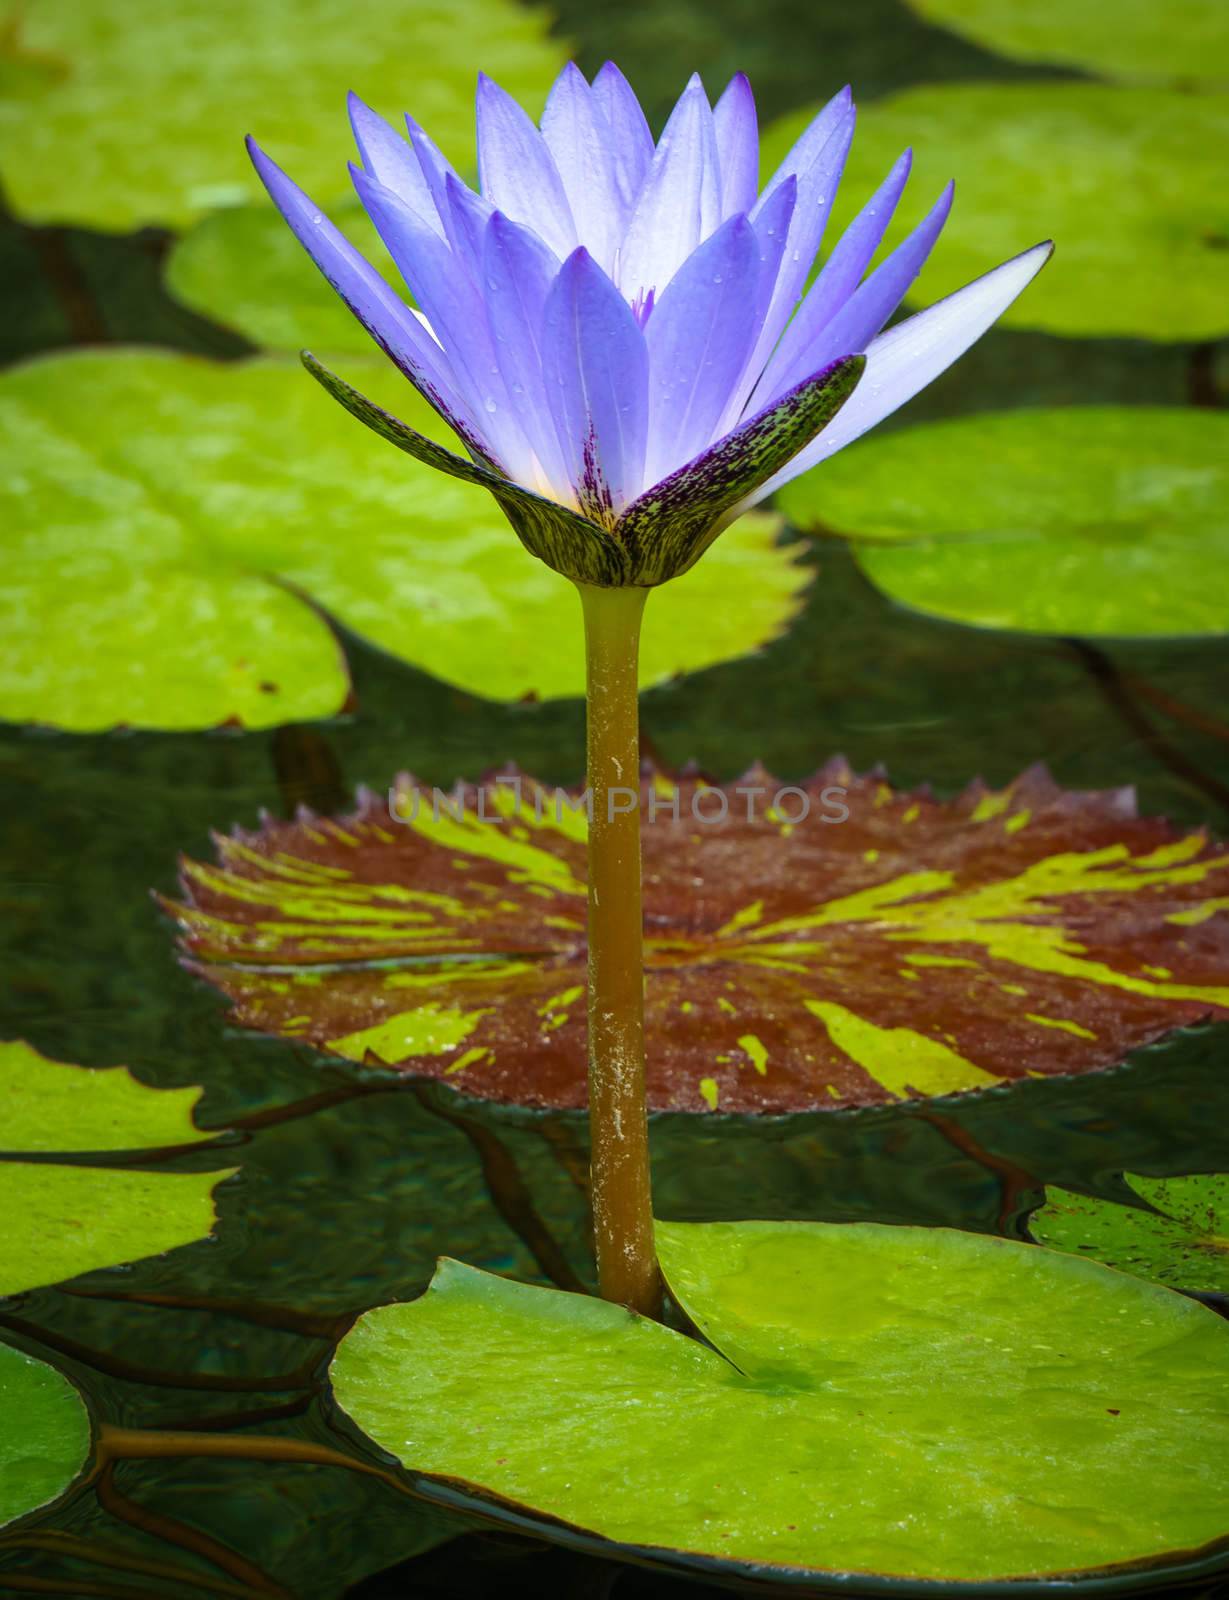 Upright pastel water lily standing vertical in water.